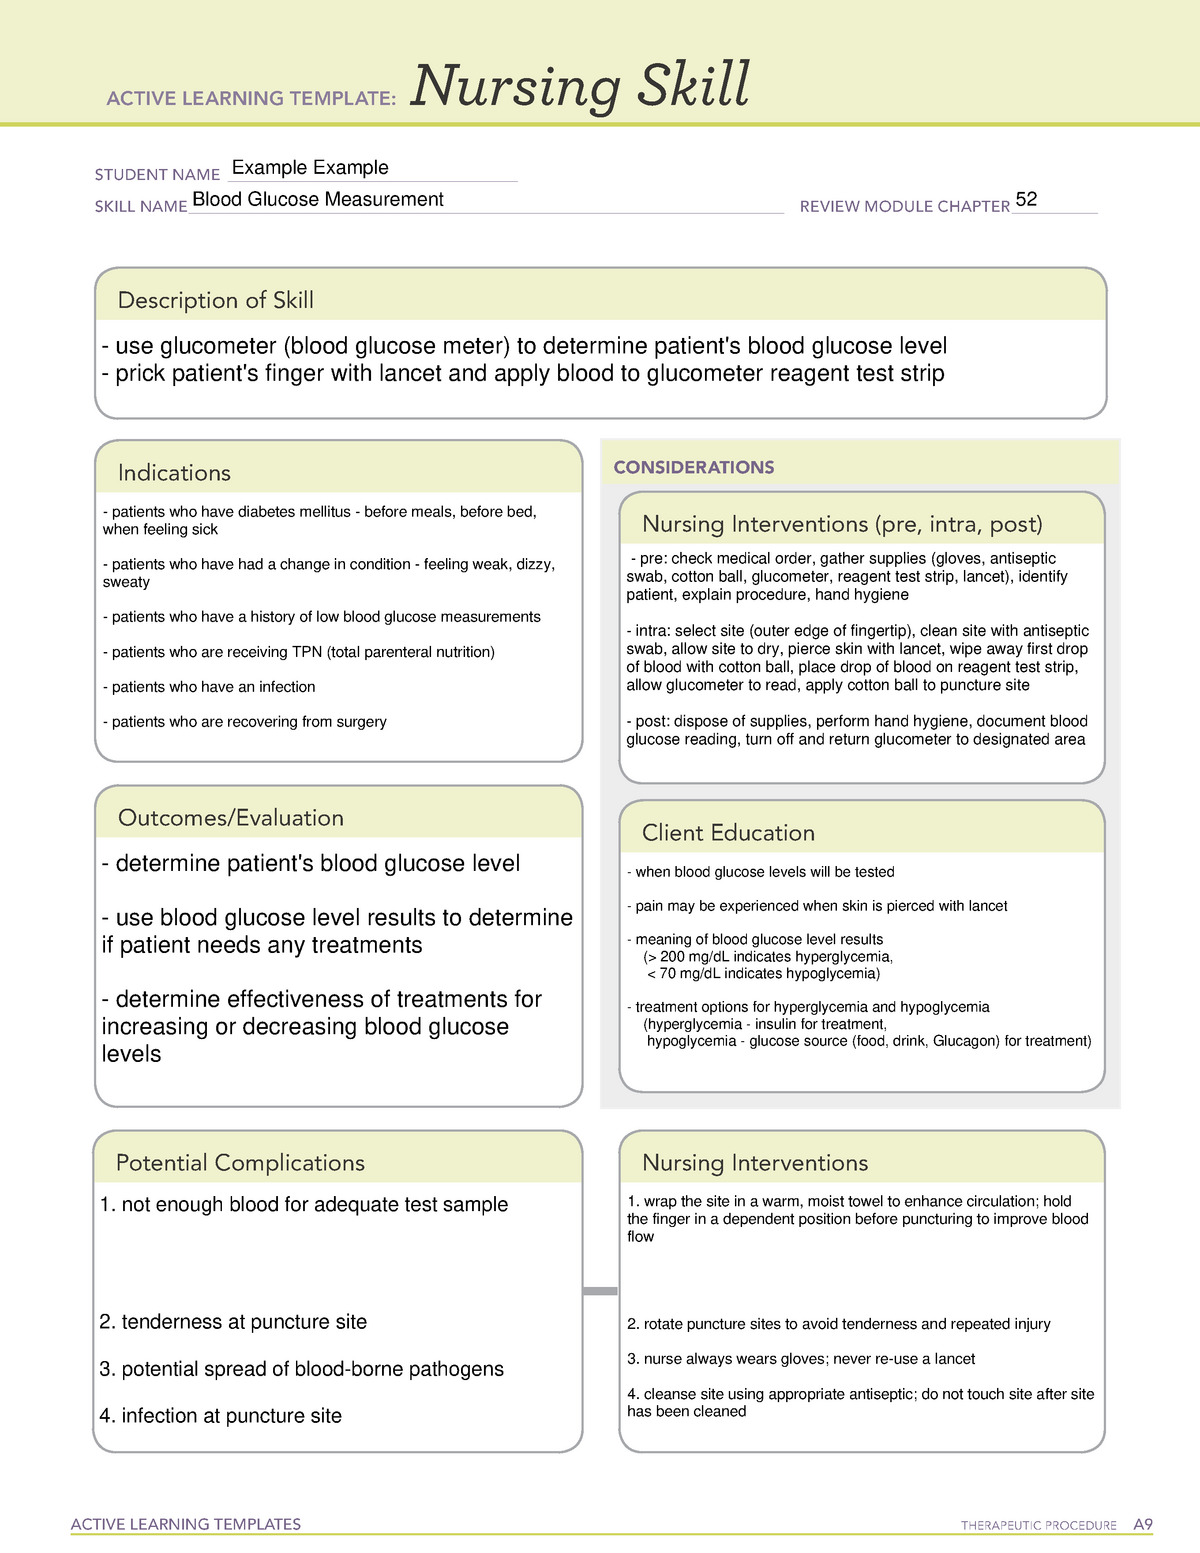 active-learning-template-nursing-skill-form-active-learning-templates-vrogue